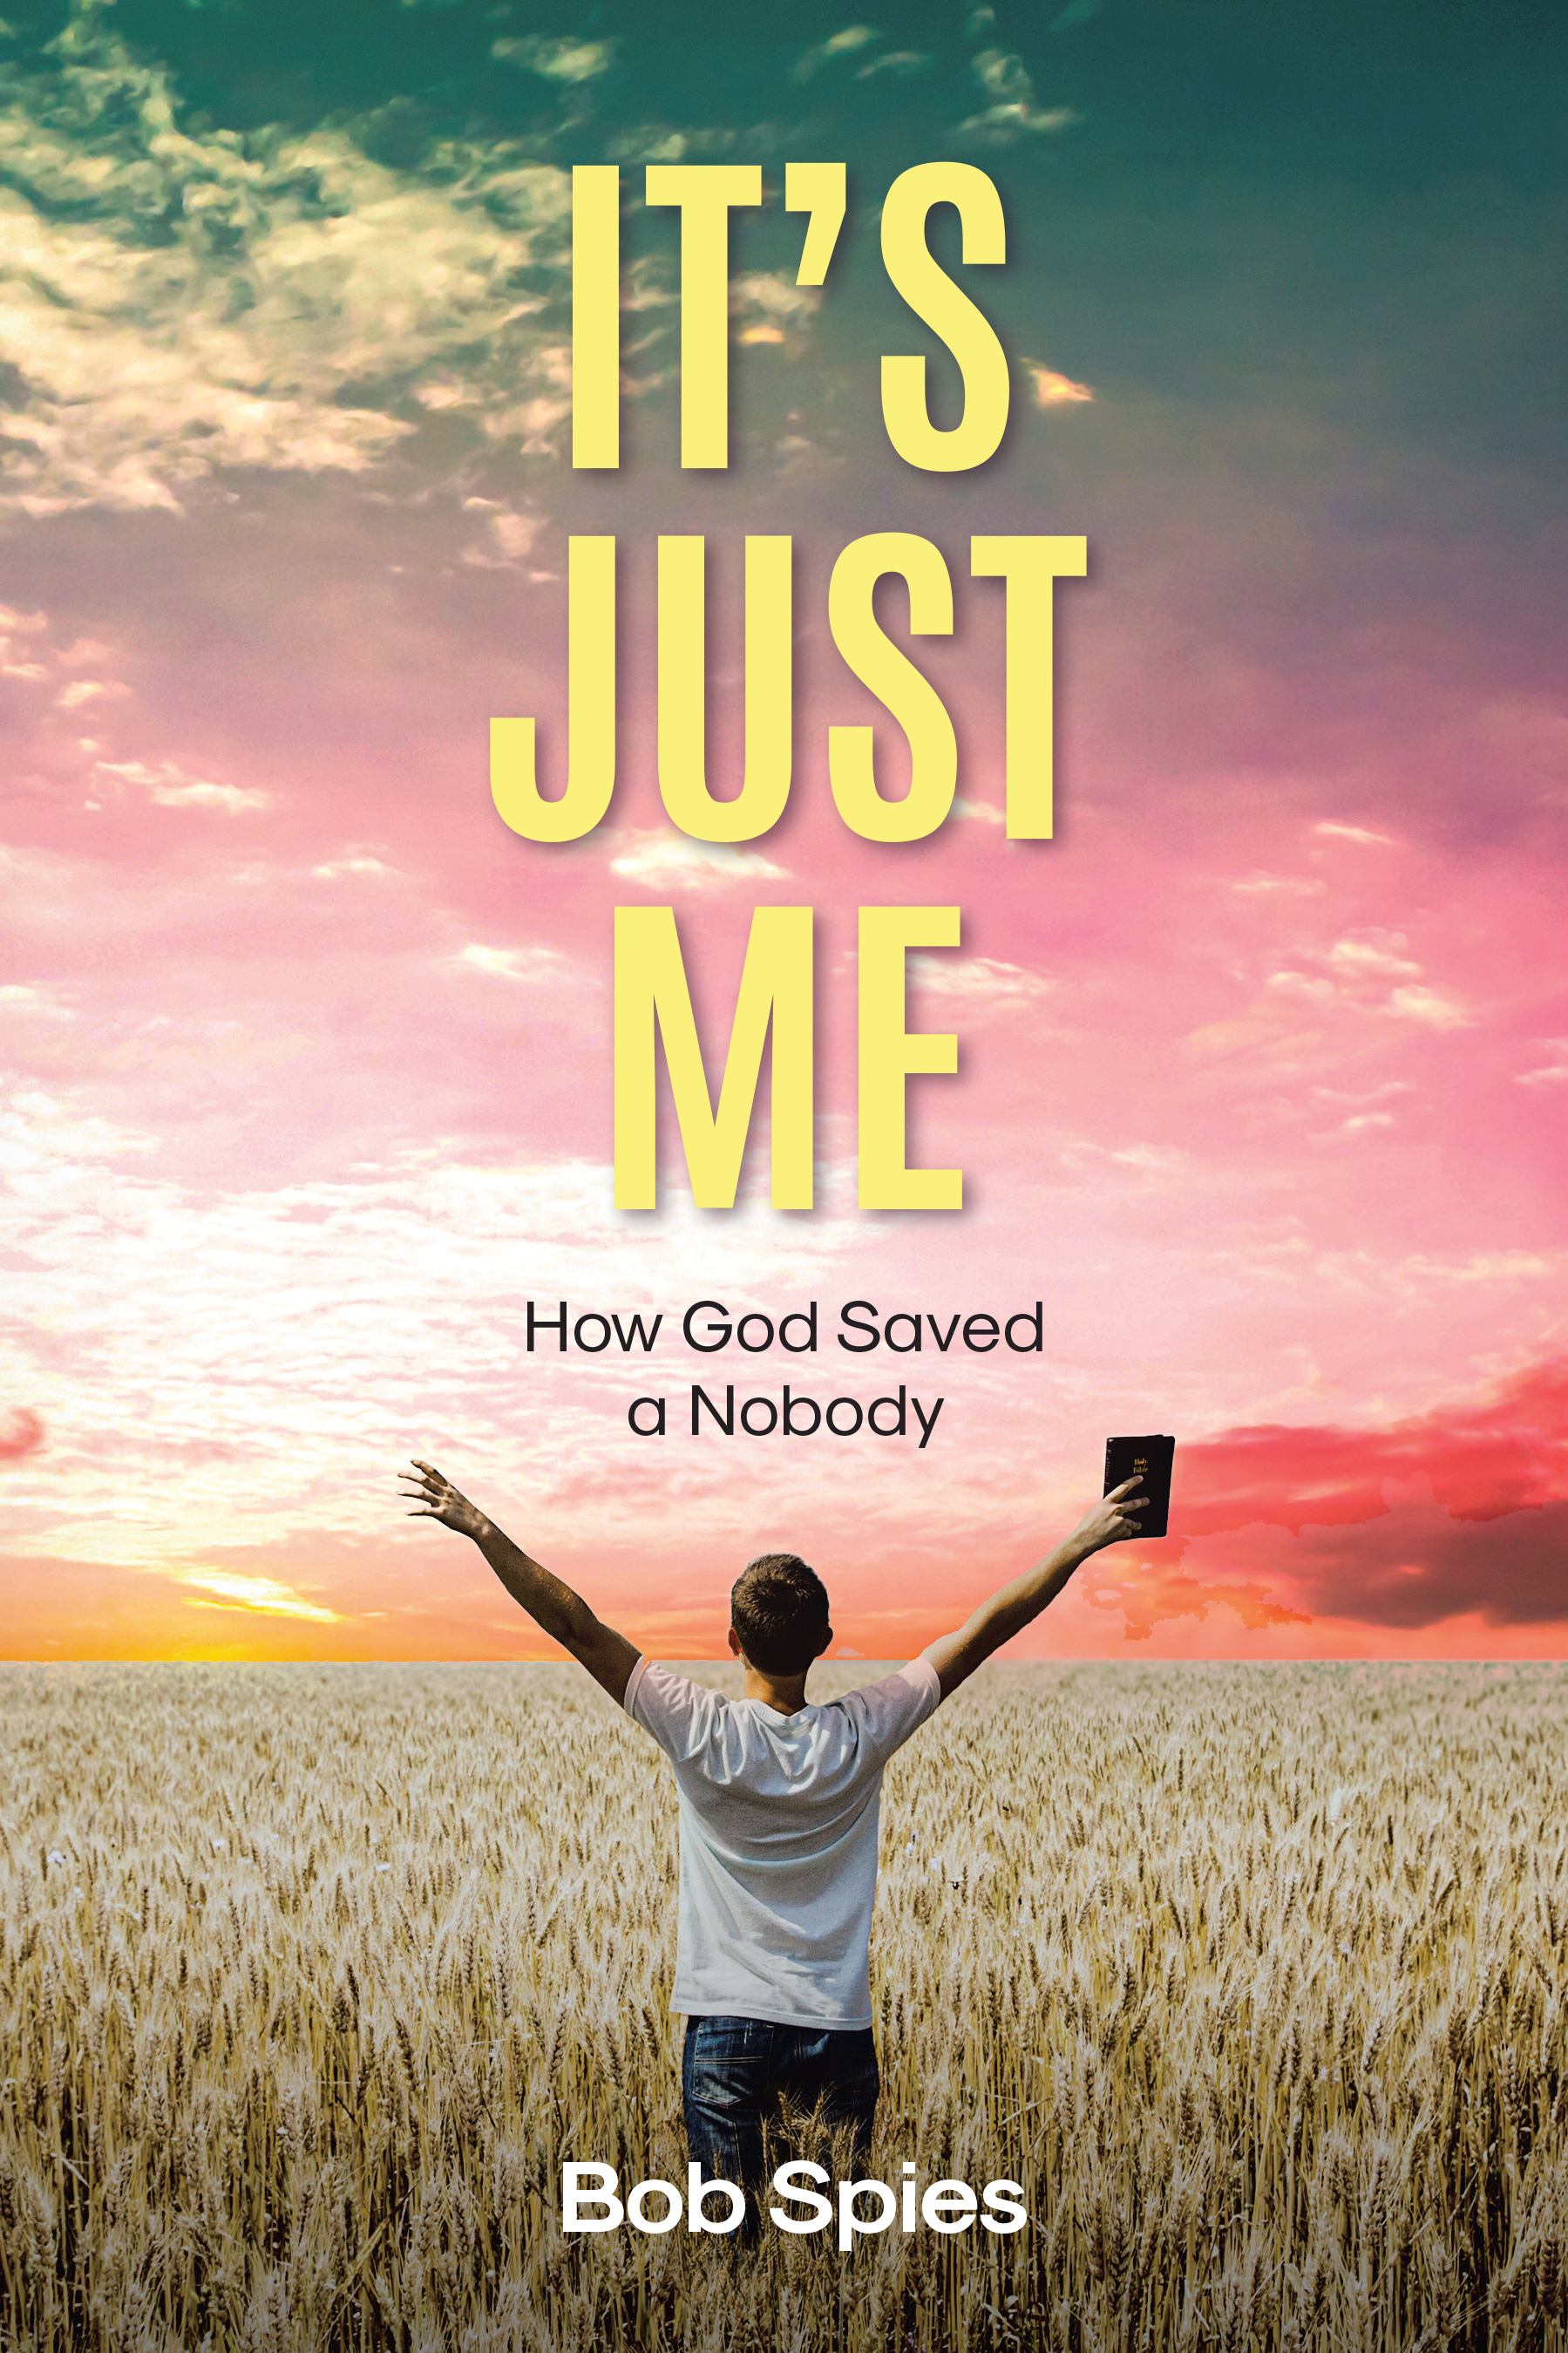 Bob Spies’s Newly Released "It’s Just Me: How God Saved a Nobody" Chronicles a Journey of Faith and Discovery